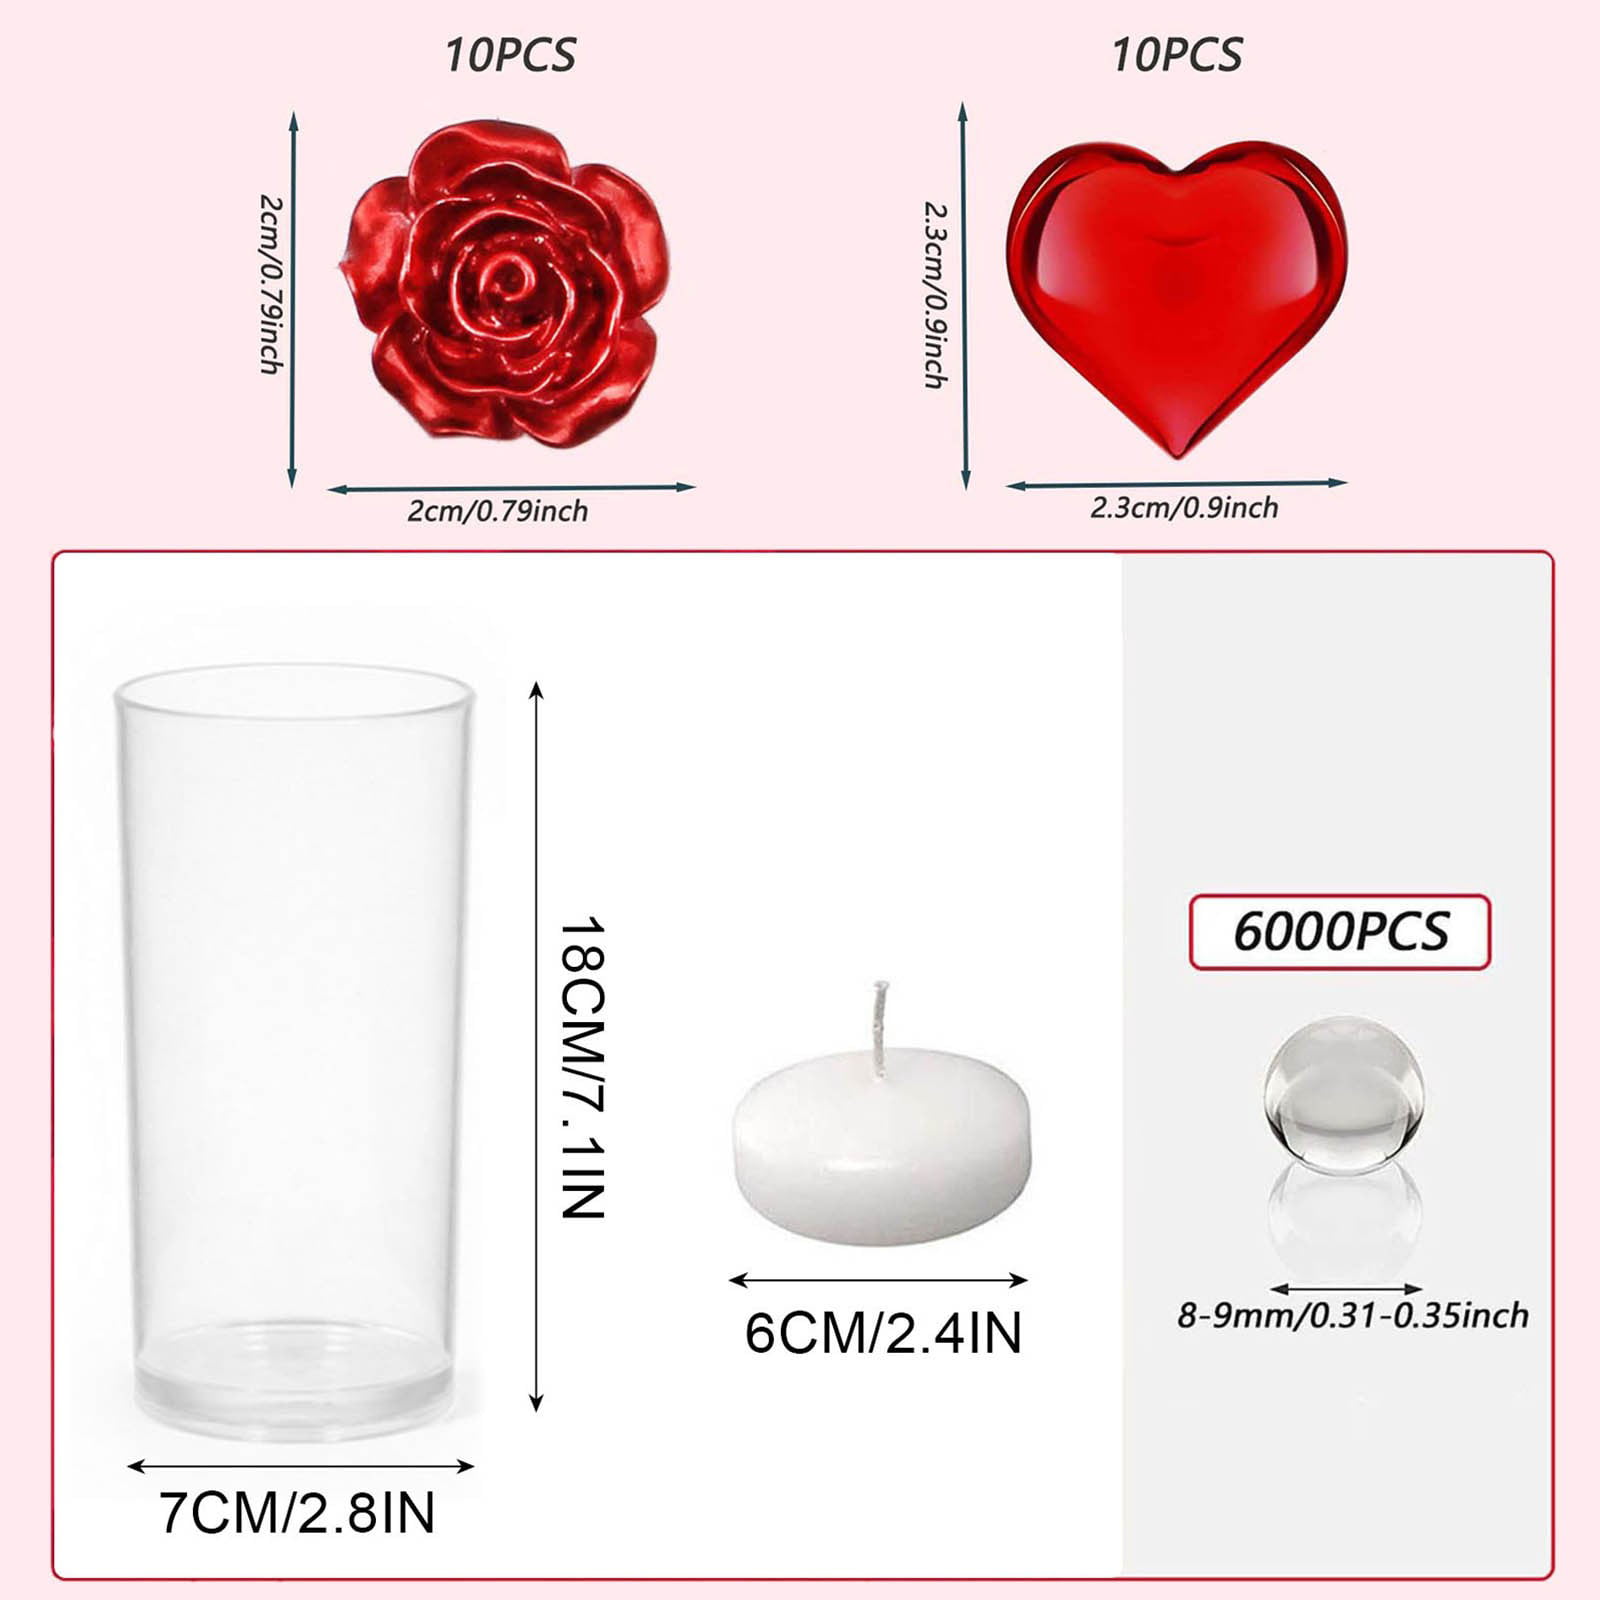 Juinte 2120 Pieces Valentine's Day Vase Filler Wedding Decoration Heart  Pearl Red Pink Heart Pearls Water Gels Beads Floating Candles Centerpiece  for